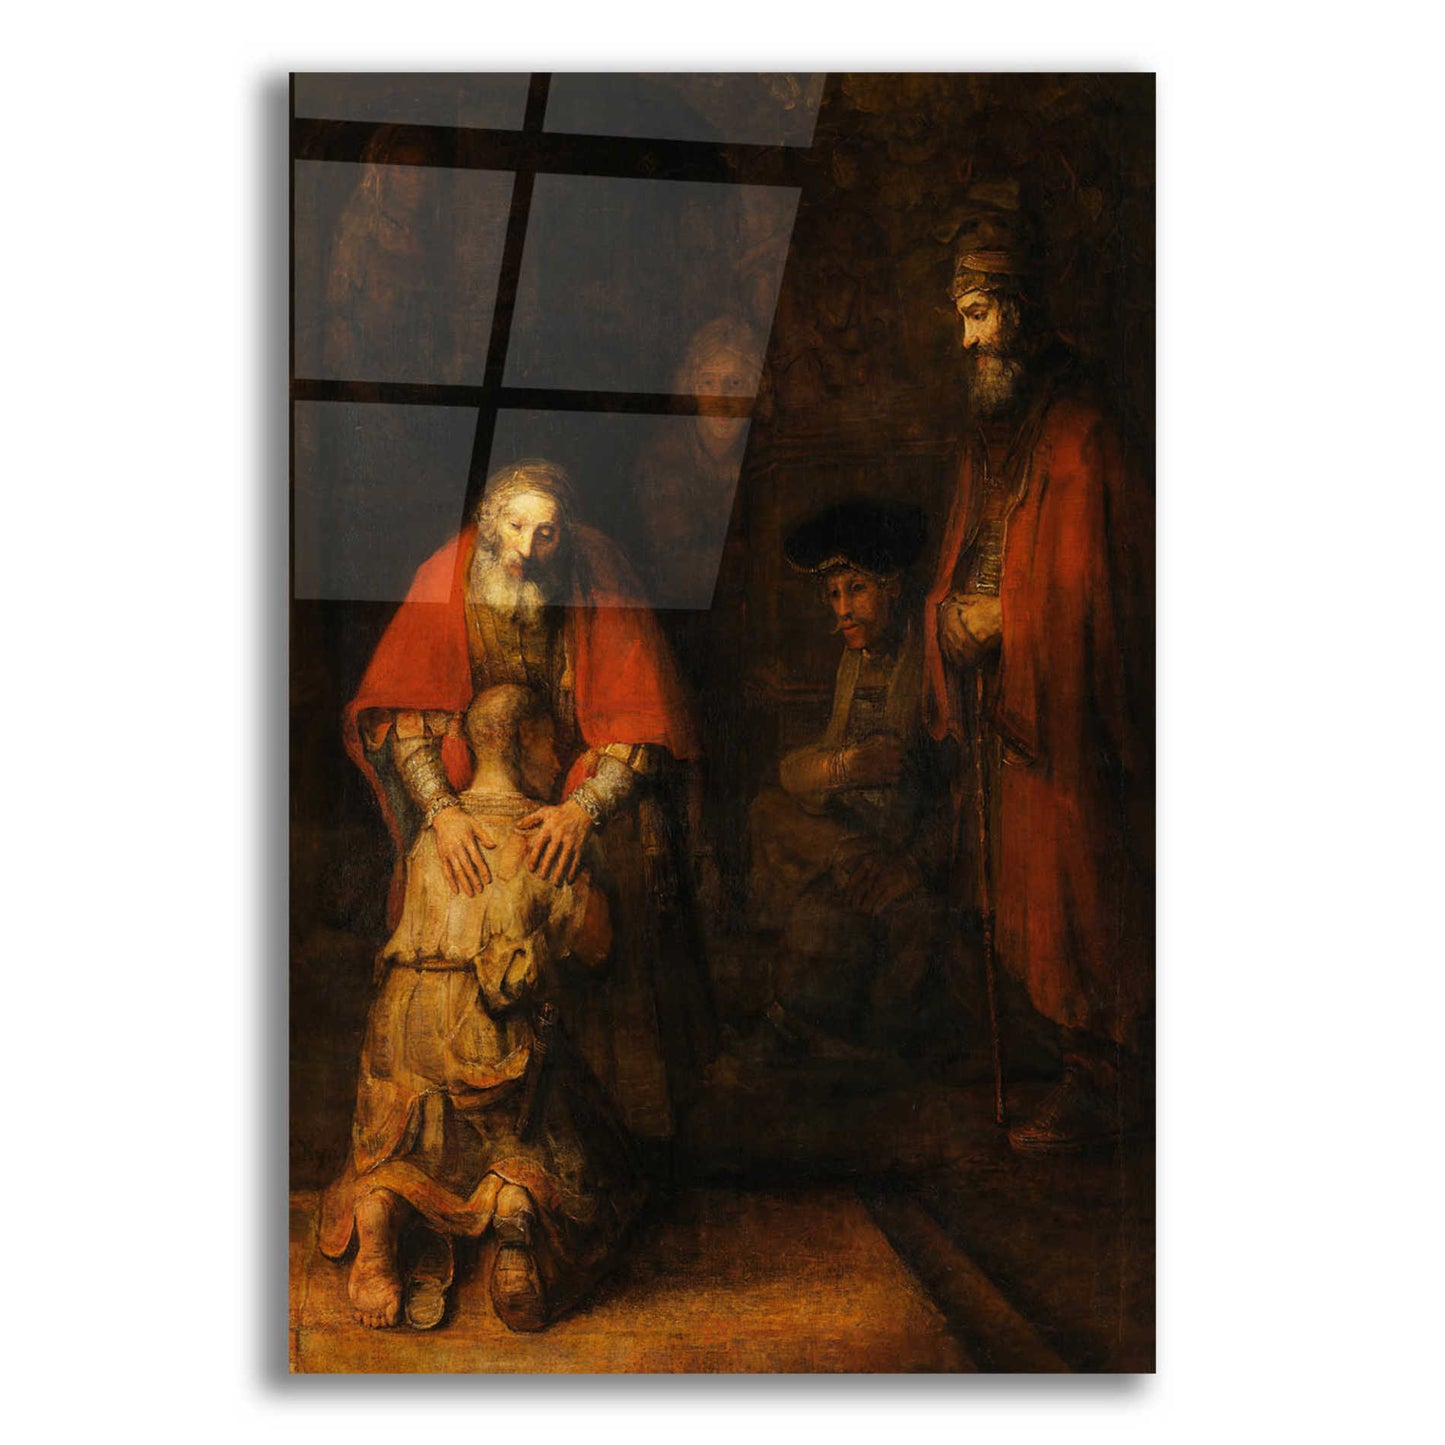 Epic Art 'The Return of the Prodigal Son' by Rembrandt, Acrylic Glass Wall Art